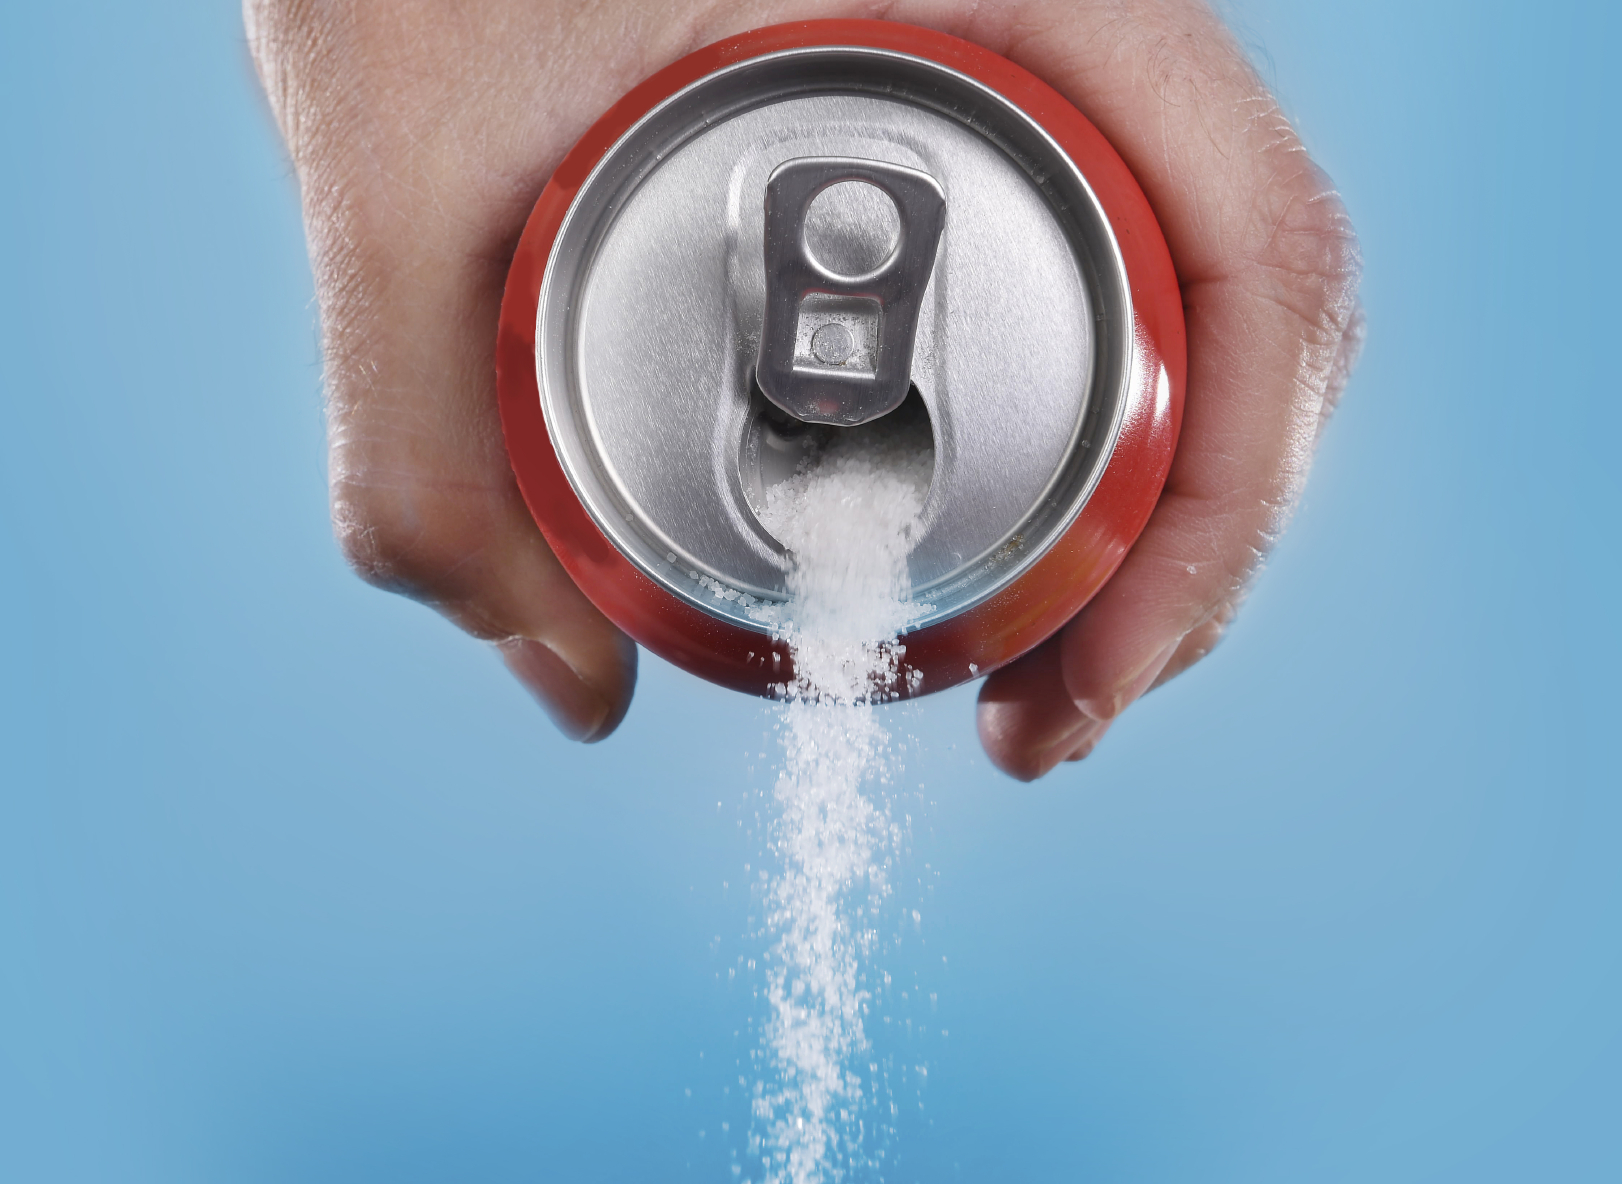 Sugary drinks may do more than just wreck your health… New research from Tufts University reveals these sweet killers are responsible for over 180,000 deaths each year.